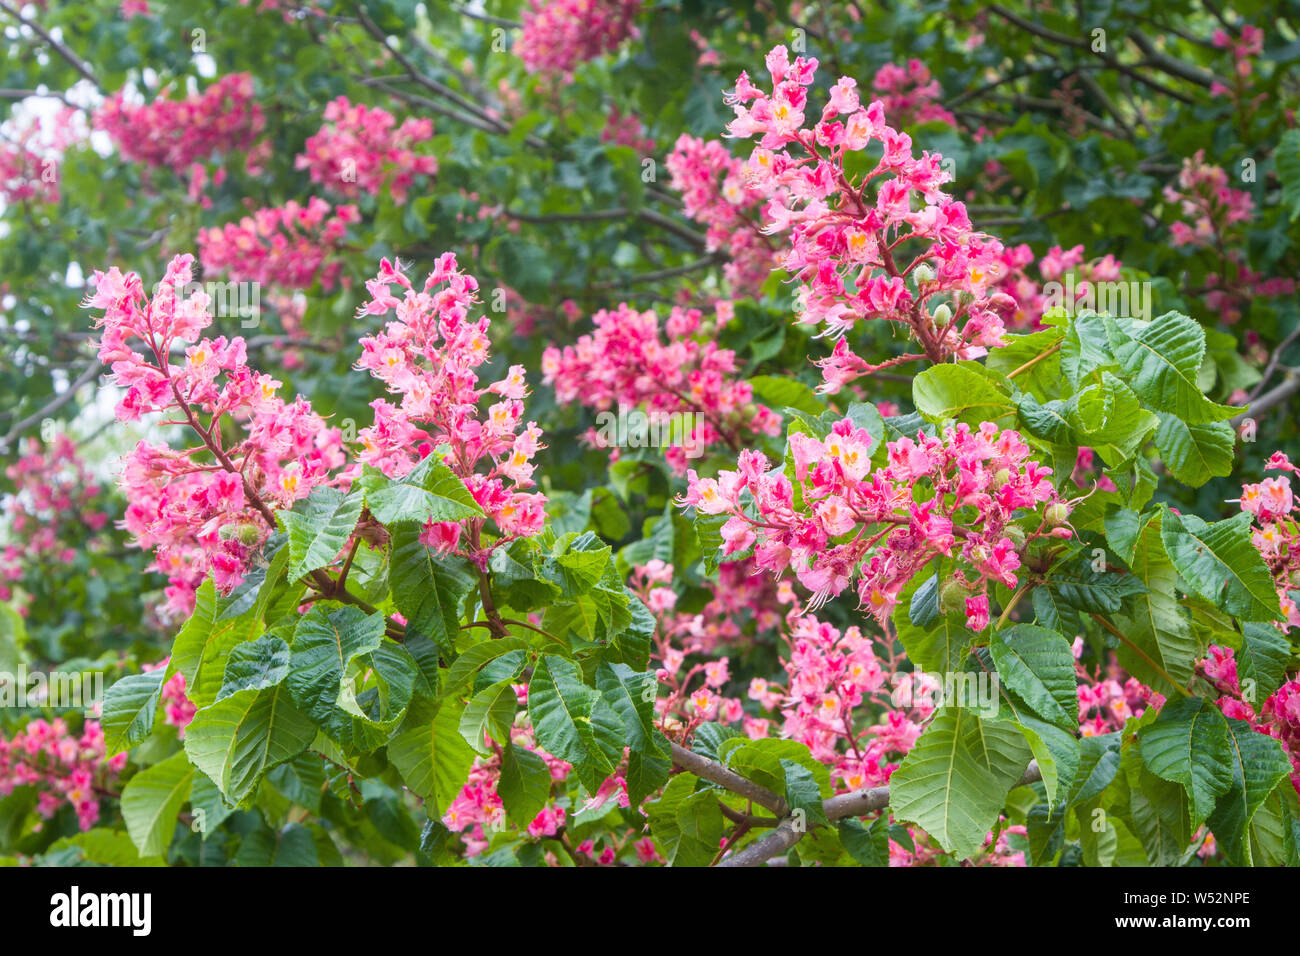 Flowers of the Red Horse Chestnut, Aesculus × carnea, Stock Photo